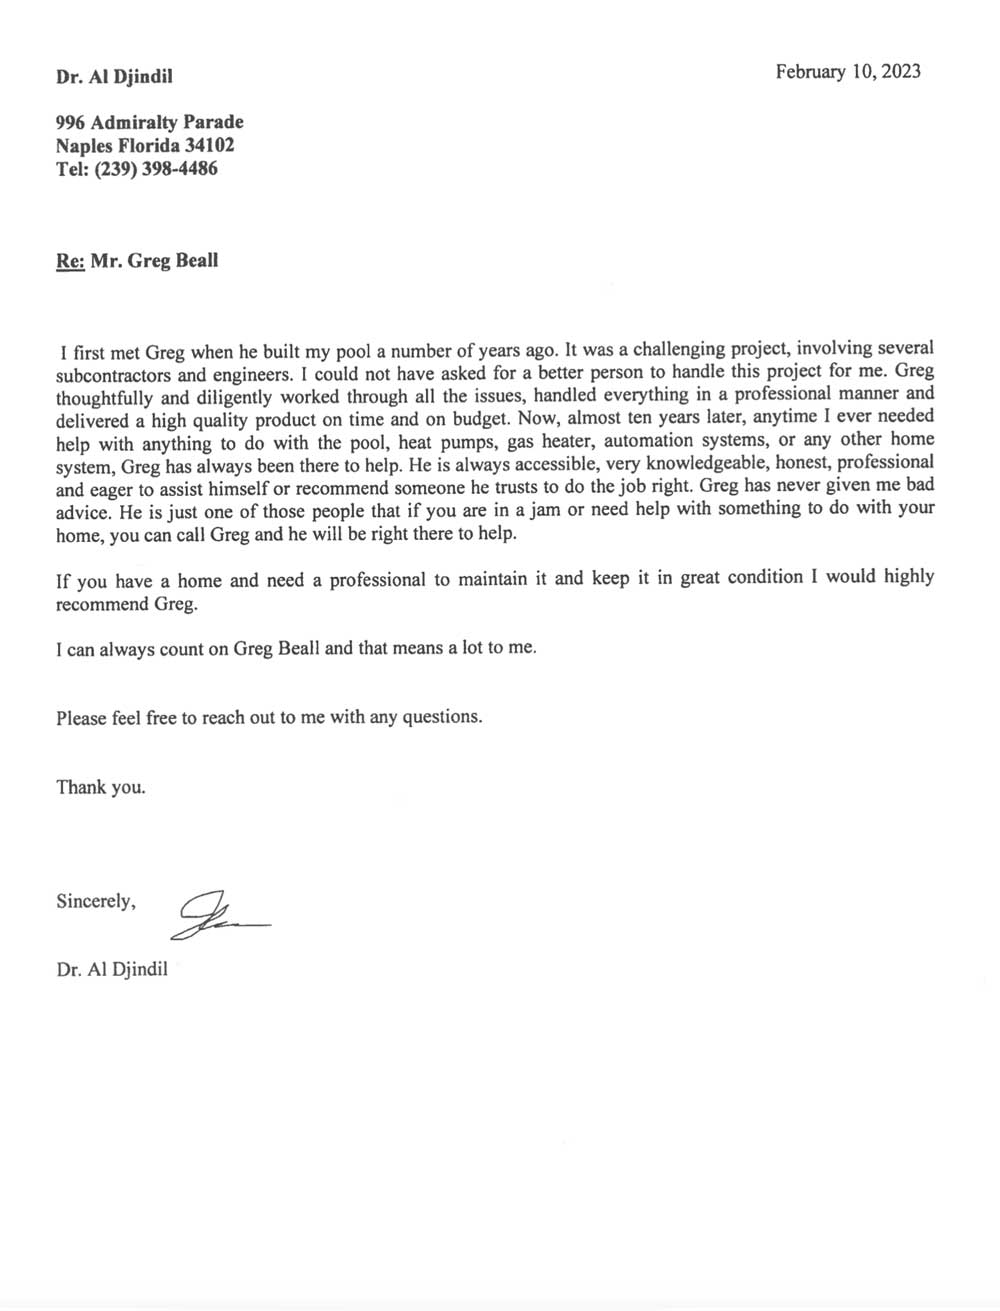 Dr. Al Djindil Letter of Recommendation | Greg Beall Home Watch & Pool Consulting